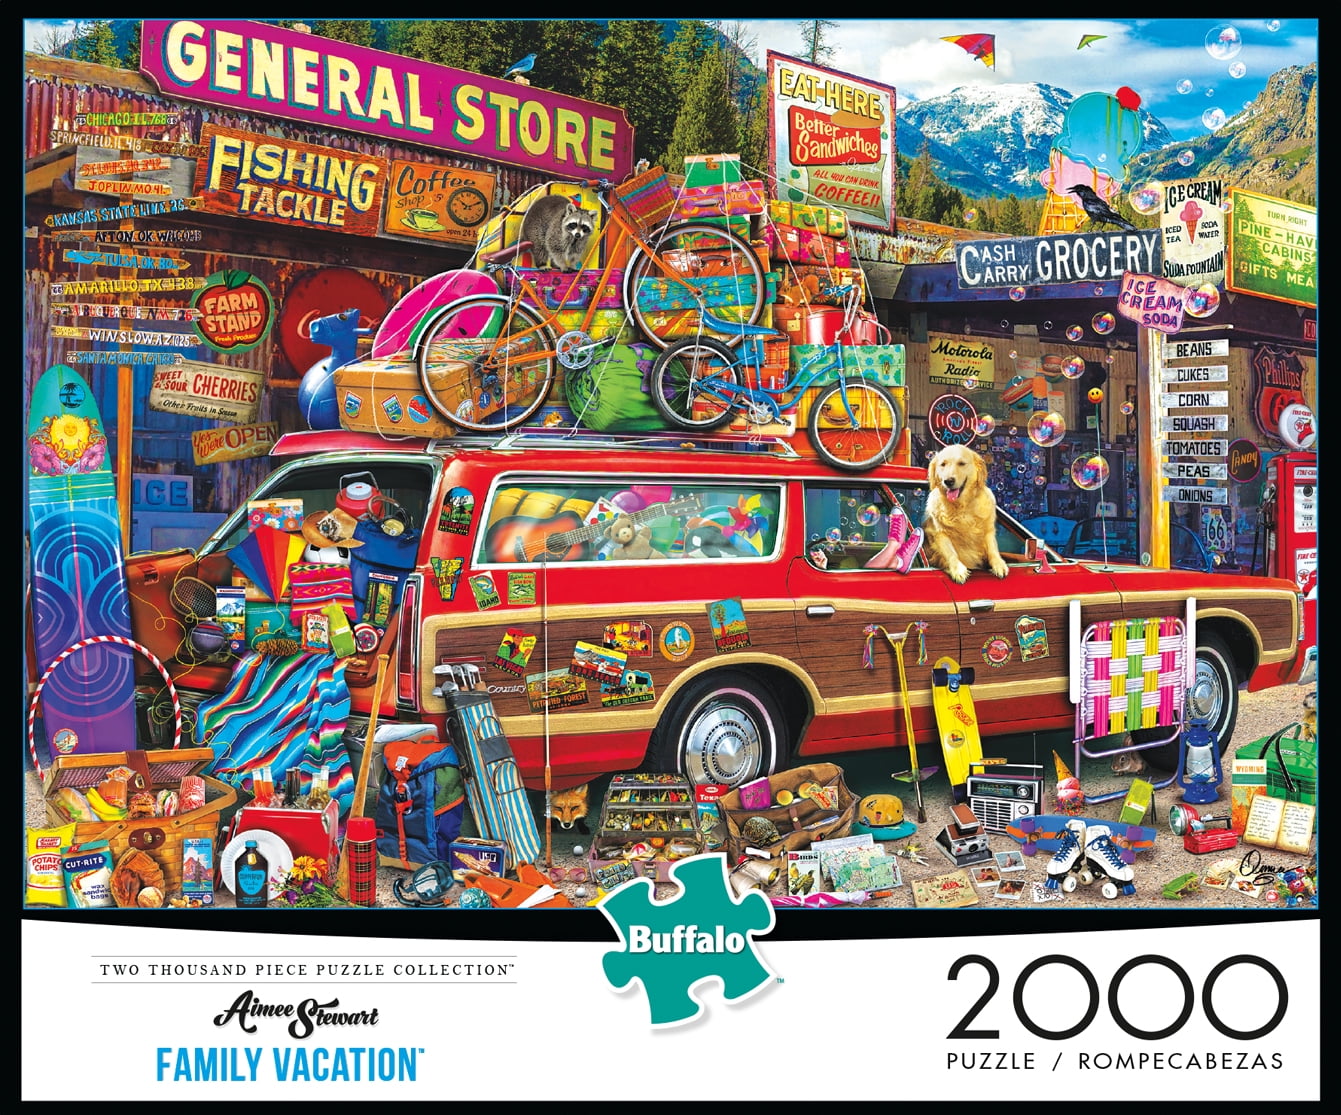 Jigsaw Puzzles for Adults 2000 Piece Jigsaw Puzzle Toys Creative Gifts Fun Family Games Wolf 2000 Piece Adult Puzzle